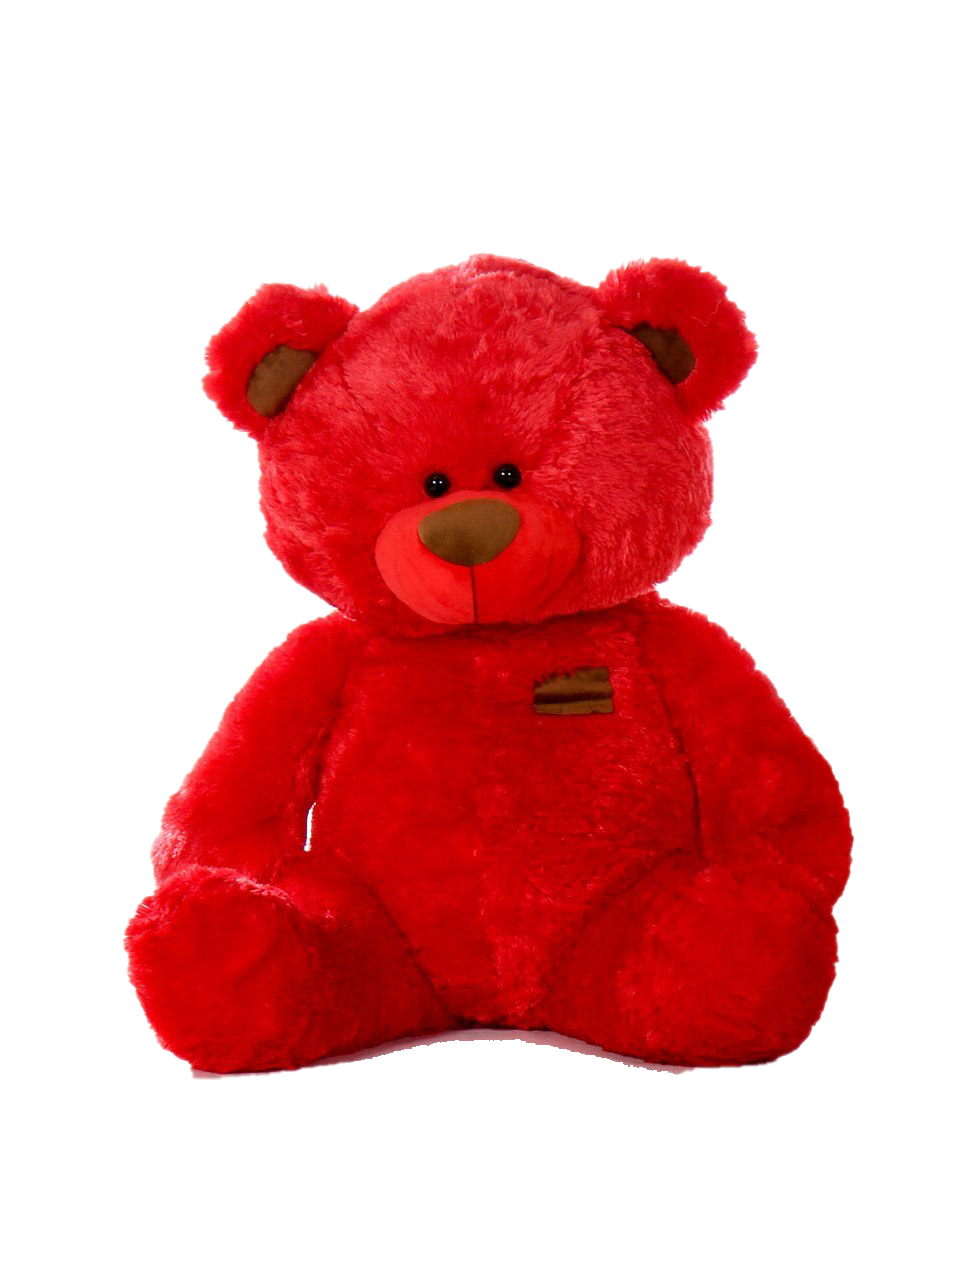 Download PNG image - Red Teddy Bear PNG Photos 